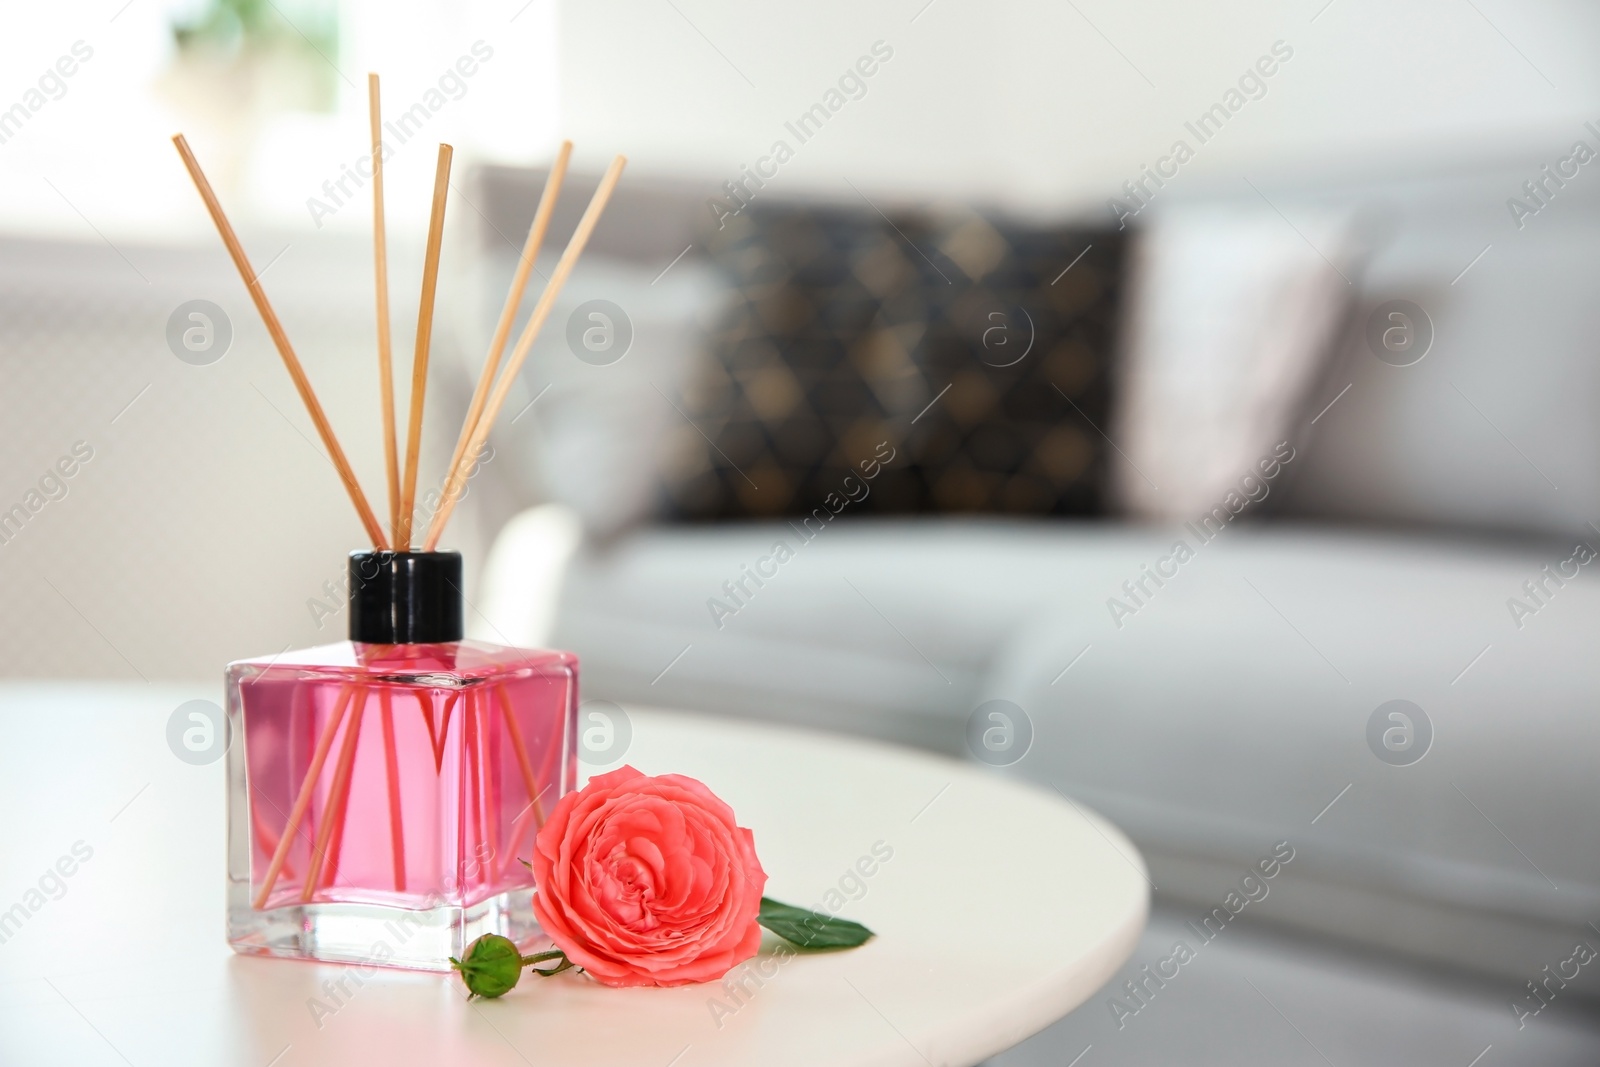 Photo of Aromatic reed air freshener and rose on table indoors